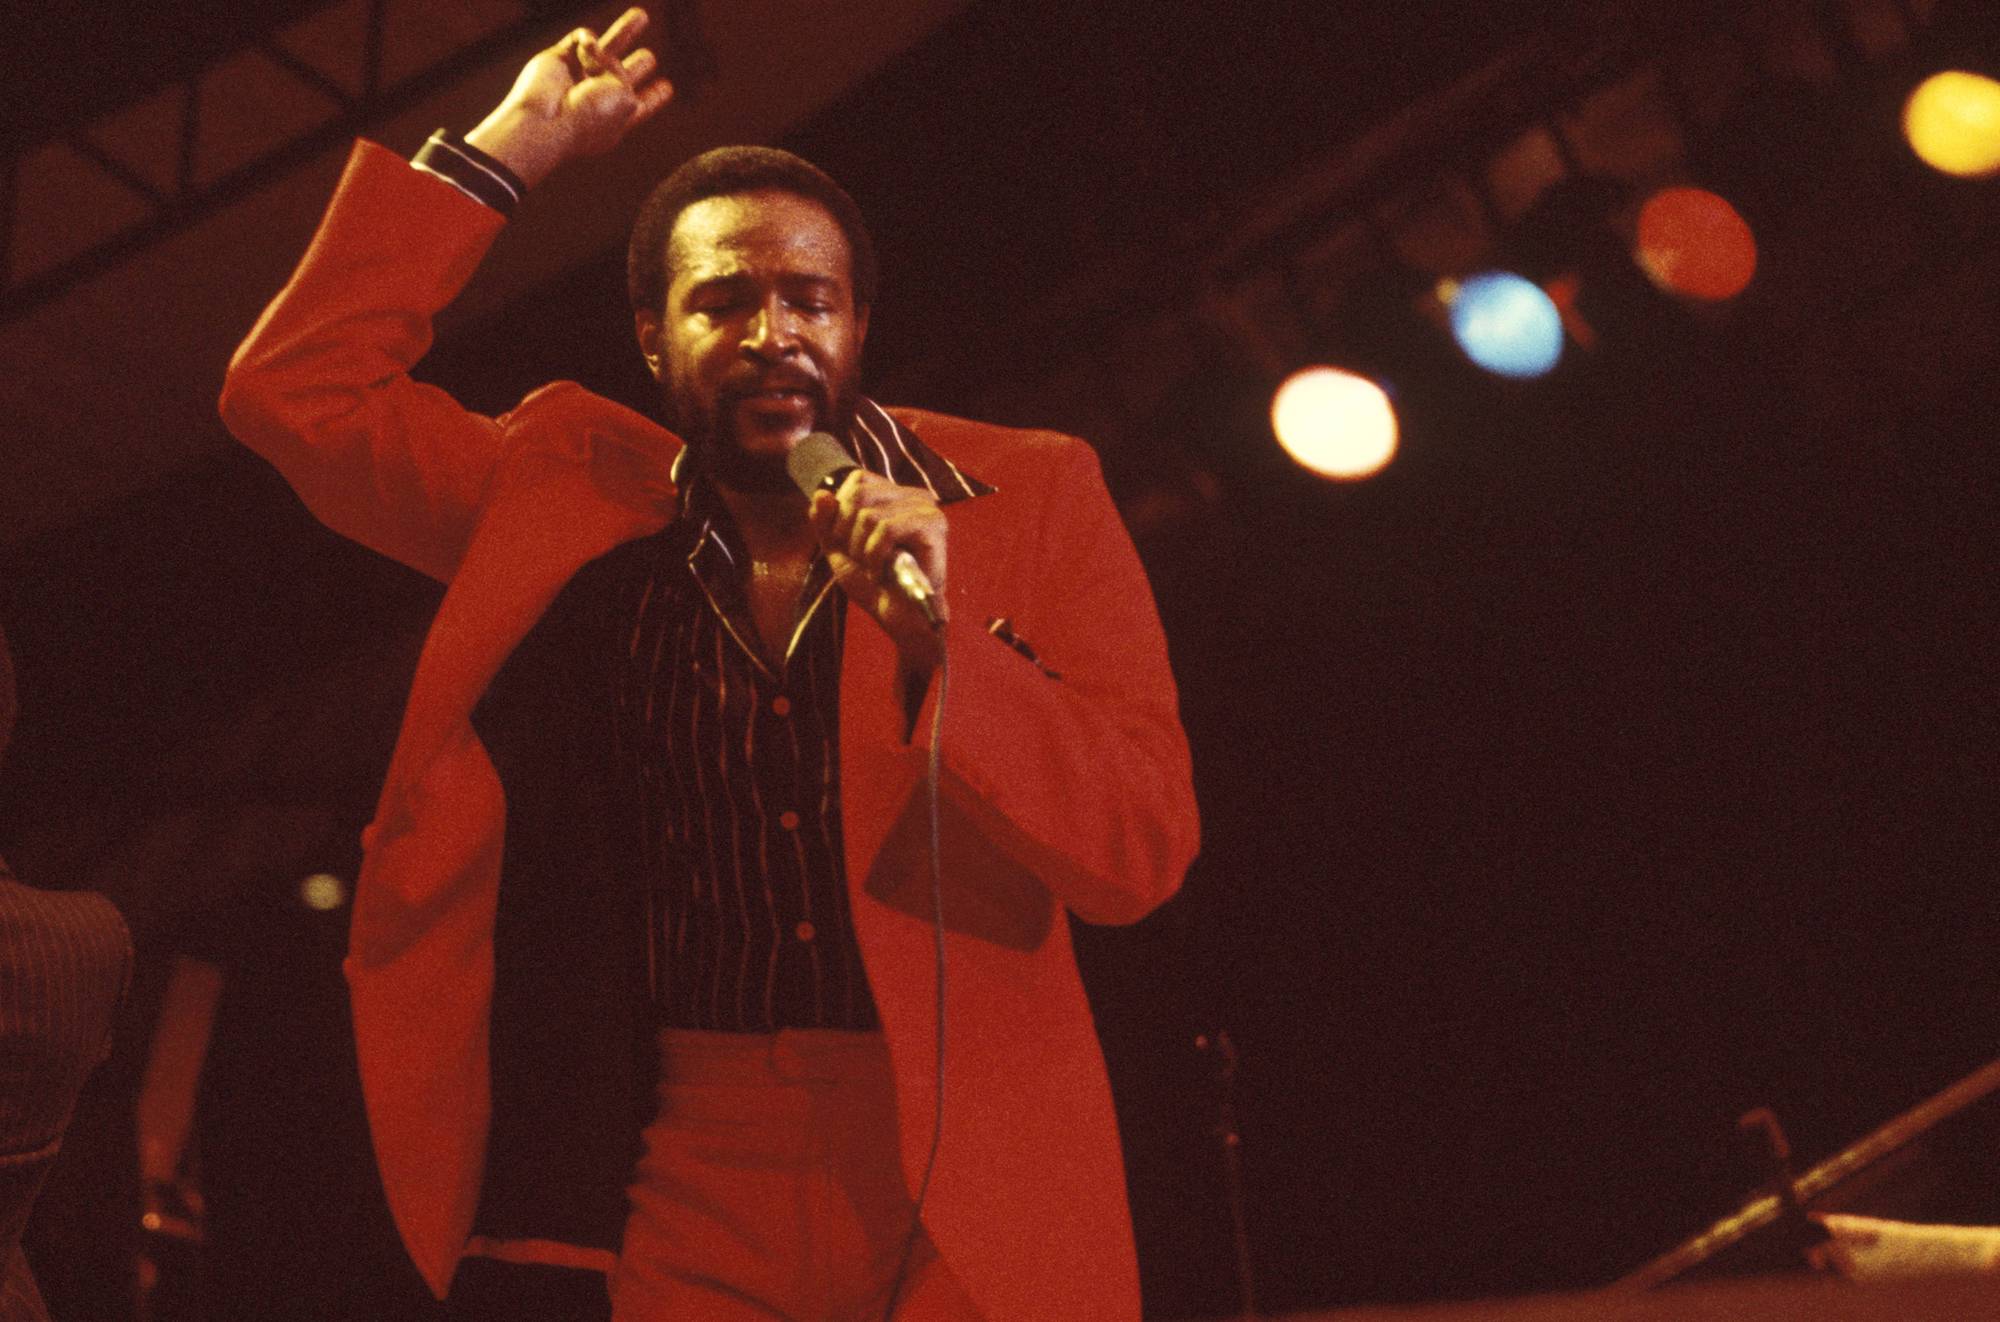 Marvin Gaye on stage, singing into a microphone, wearing a red outfit